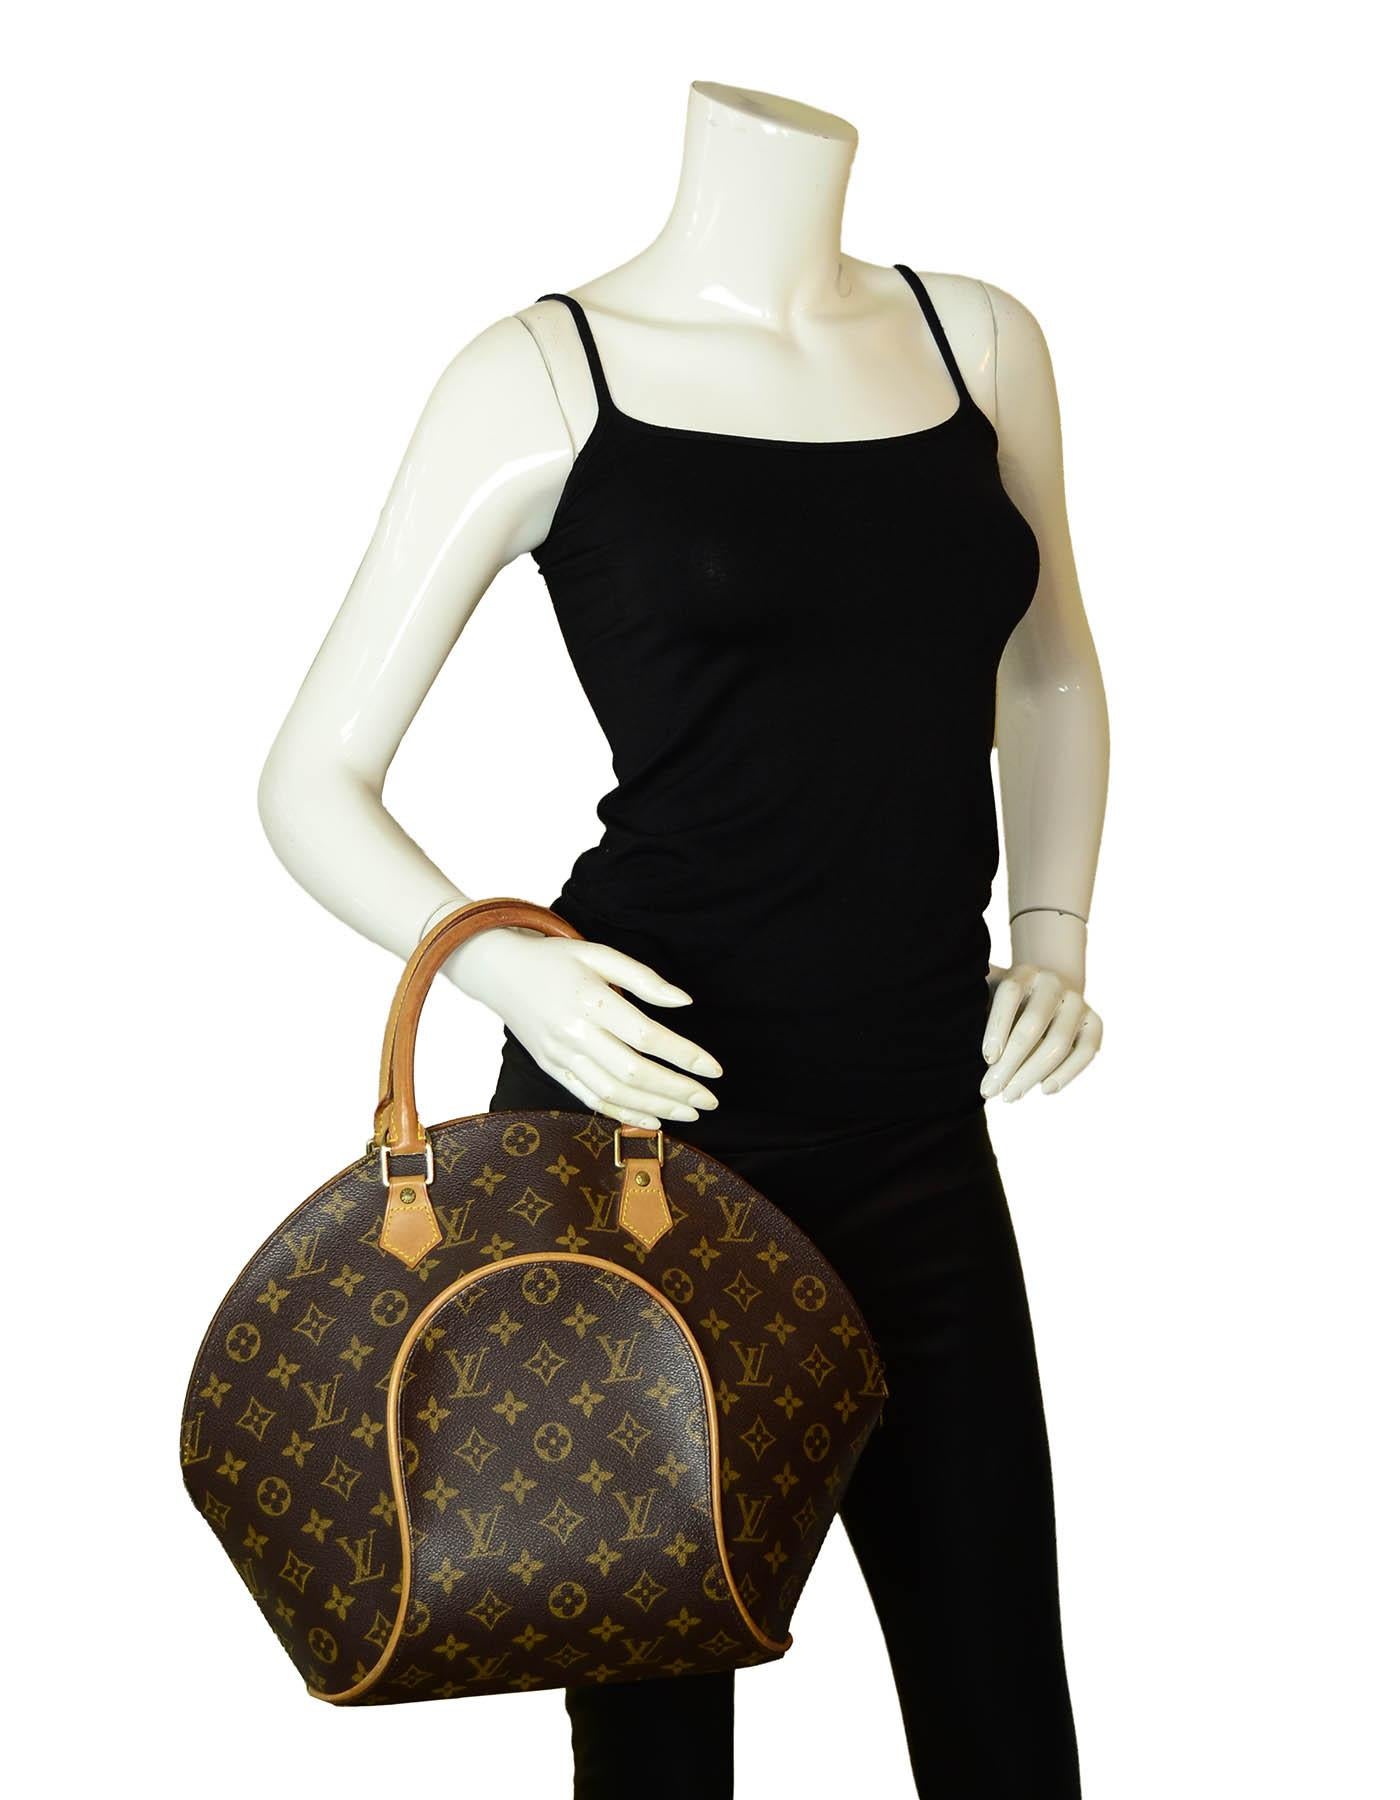 Louis Vuitton Monogram Coated Canvas Ellipse MM Top Handle Bag

Made In: France
Year of Production: 1991
Color: Brown monogram
Hardware: Goldtone
Materials: Coated canvas & vachetta leather
Lining: Brown canvas
Closure/Opening: Zipper
Interior